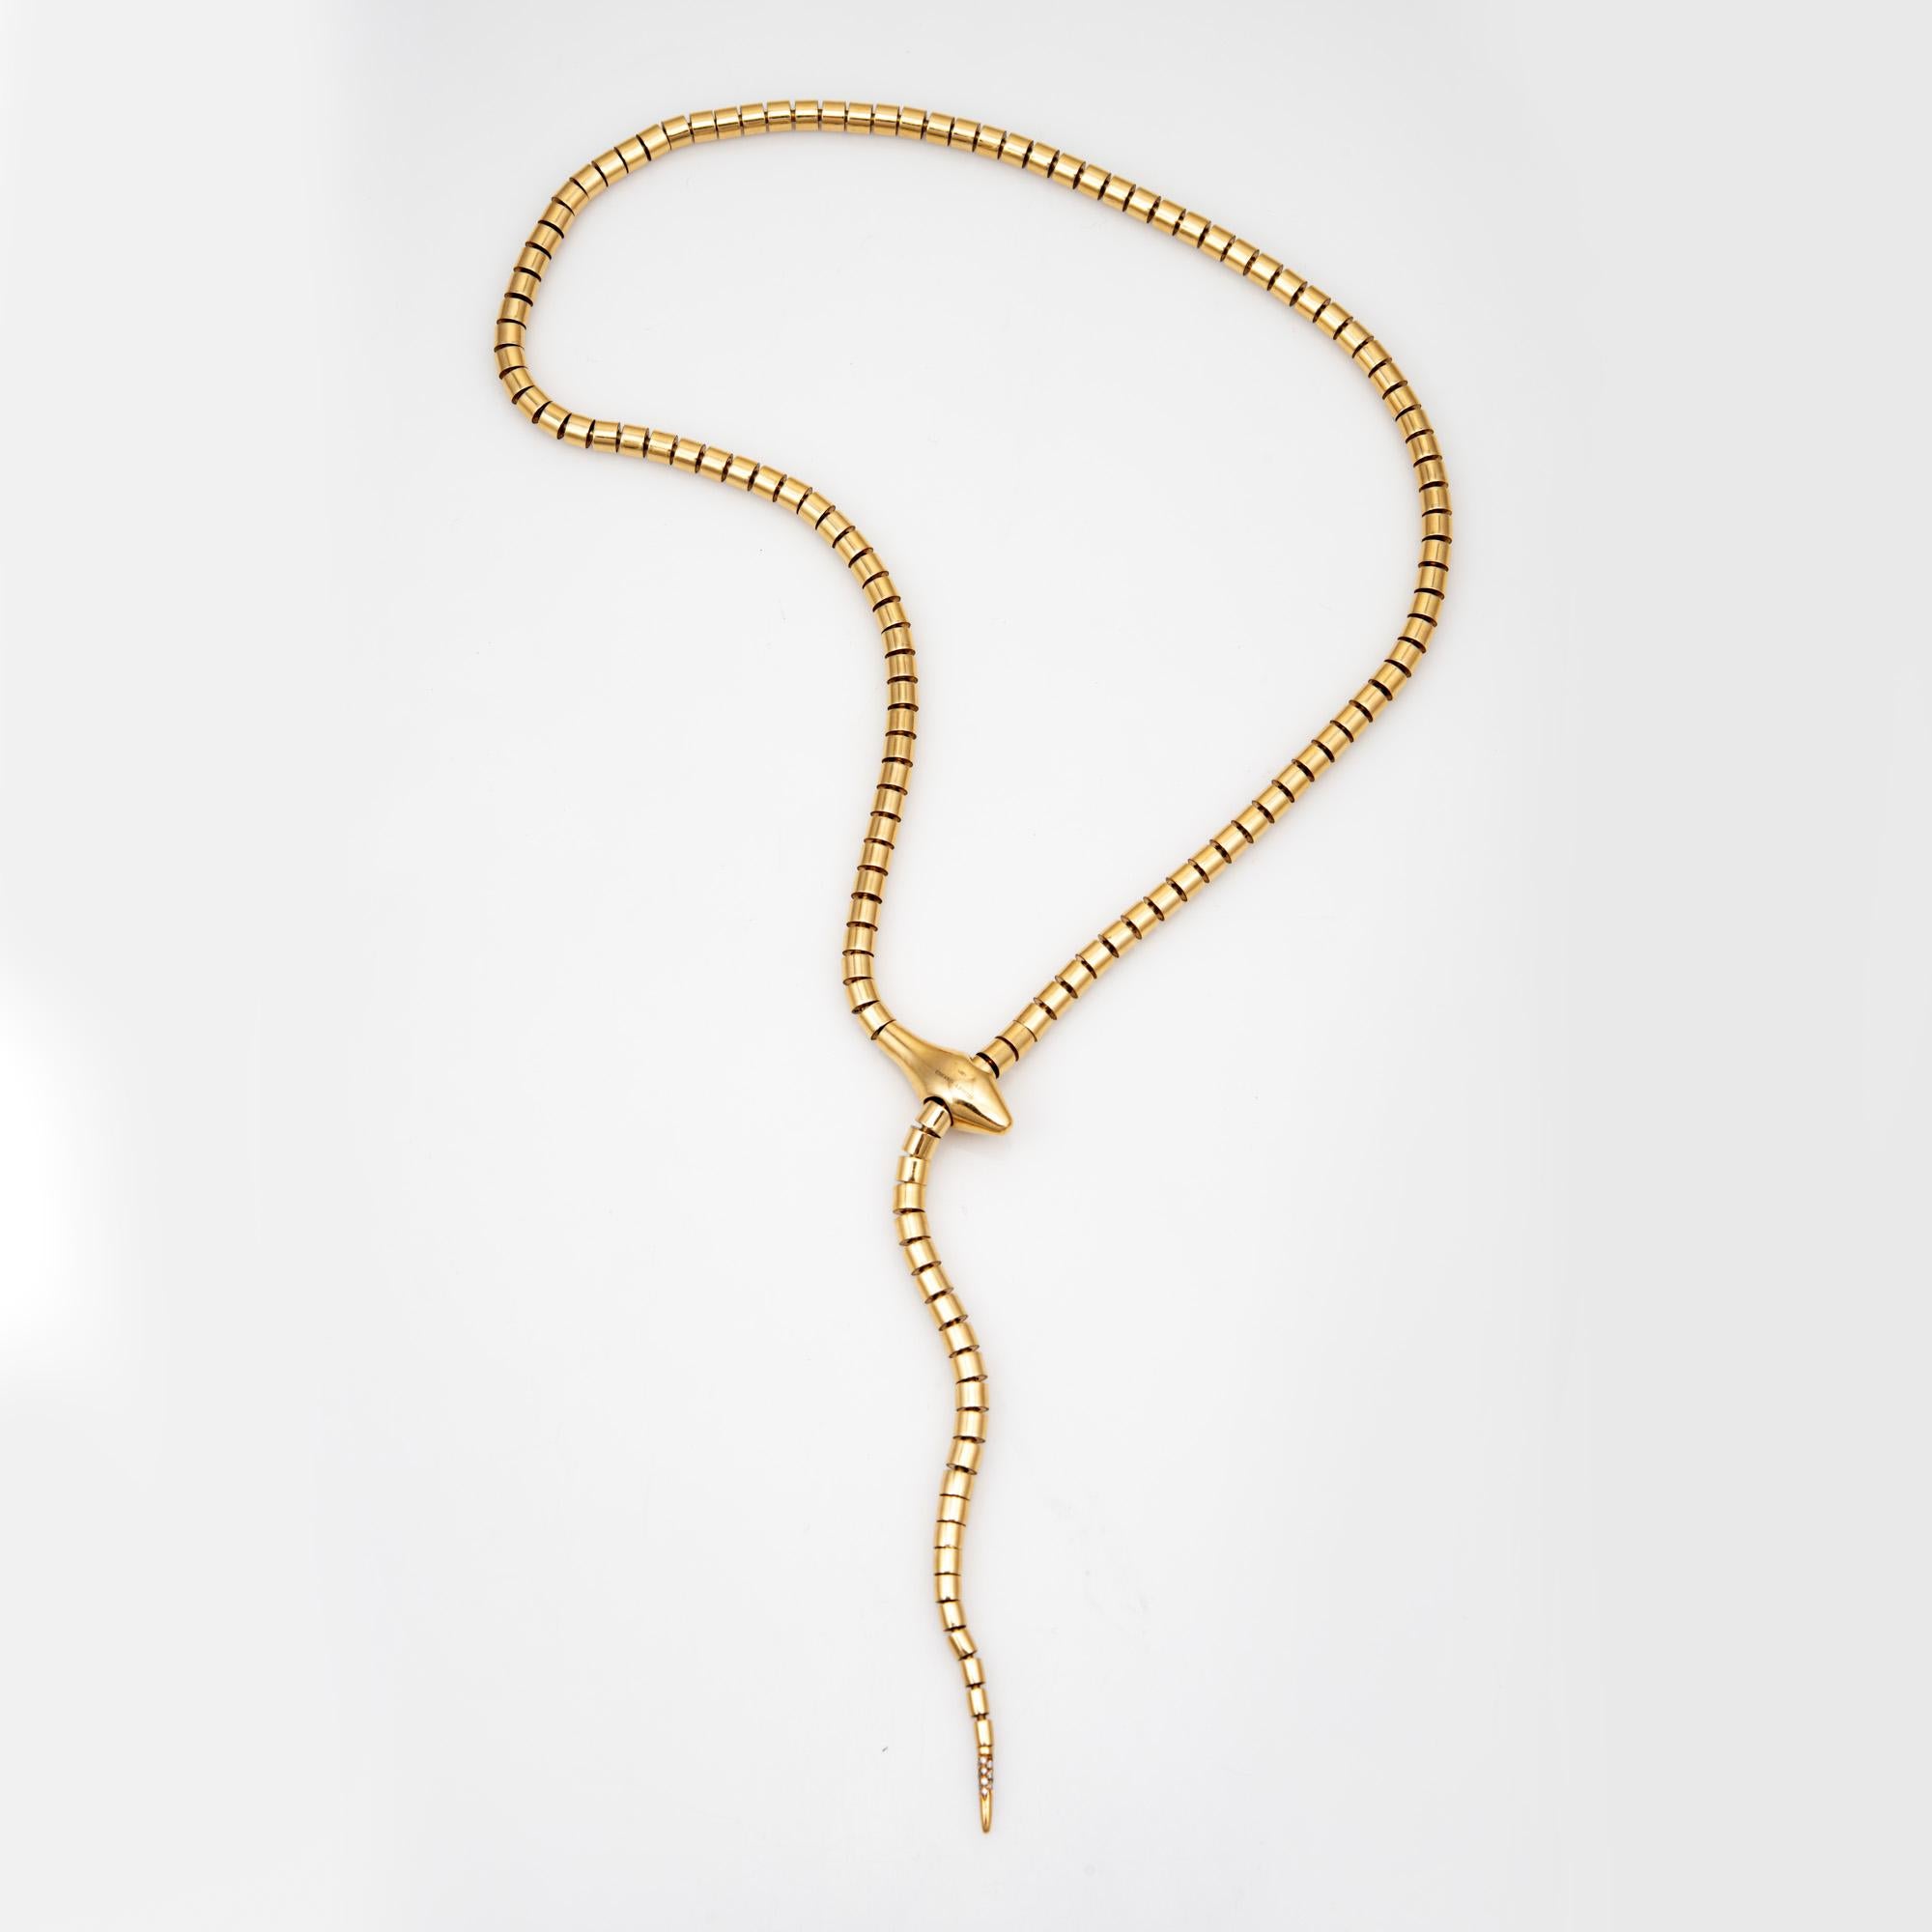 Contemporary Sidney Garber Snake Necklace Wrap Around Lariat 18k Yellow Gold Estate Jewelry  